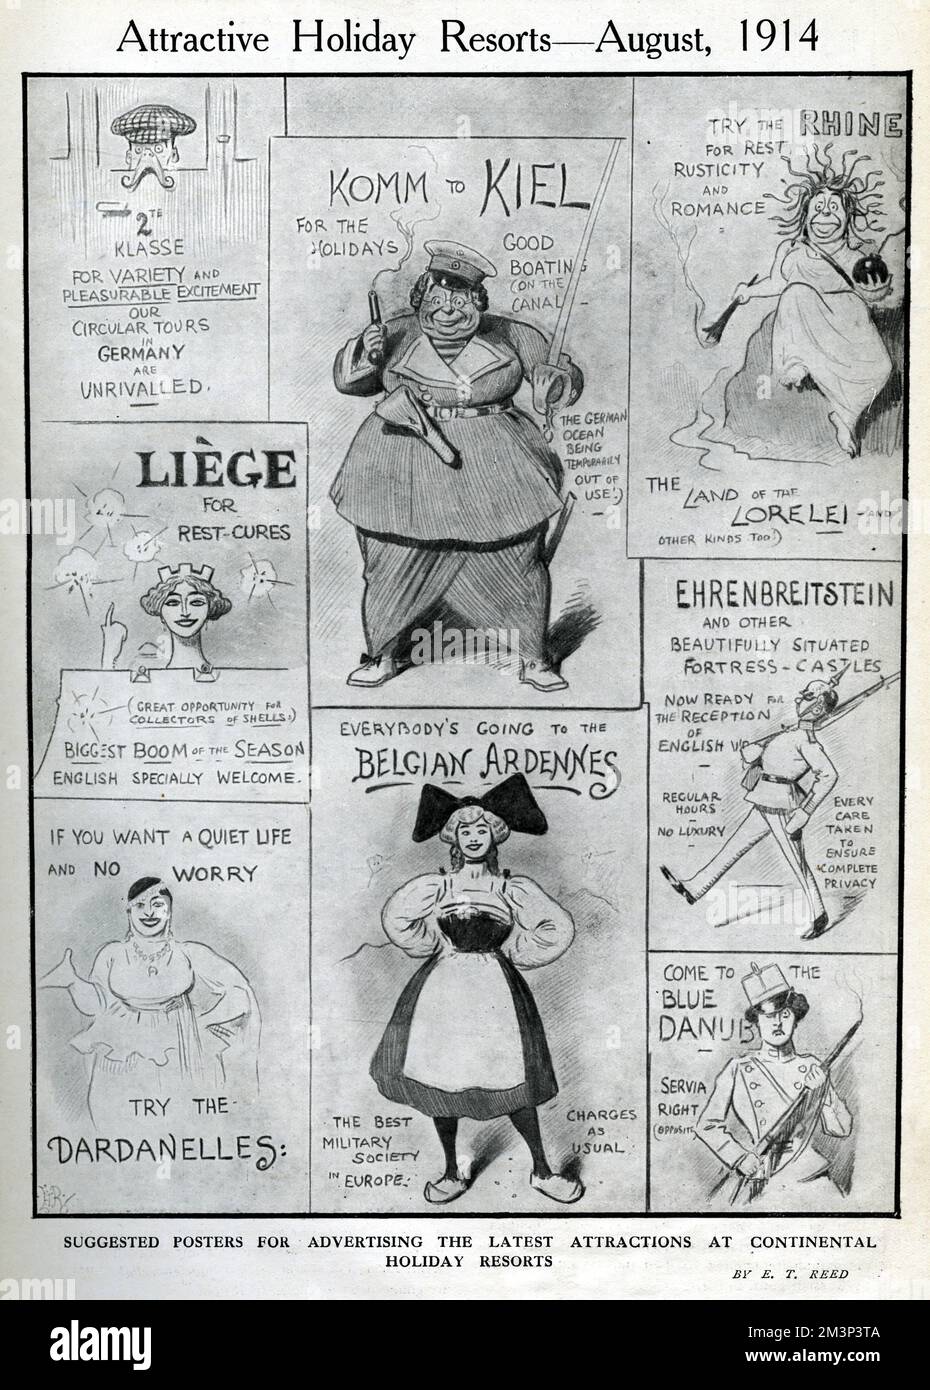 Cartoon, Attractive Holiday Resorts, August 1914, WW1.  Showing suggested posters for advertising the latest attractions at continental holiday resorts, including boating on the canal at Kiel, Germany, rest cures at Liege, Belgium, a quiet life in the Dardanelles, Turkey, the Belgian Ardennes, rusticity and romance on the Rhine (an ugly Lorelei holds a bomb), Ehrenbreitstein and other fortress castles, Germany, and the Blue Danube, handy for Serbia.      Date: August 1914 Stock Photo